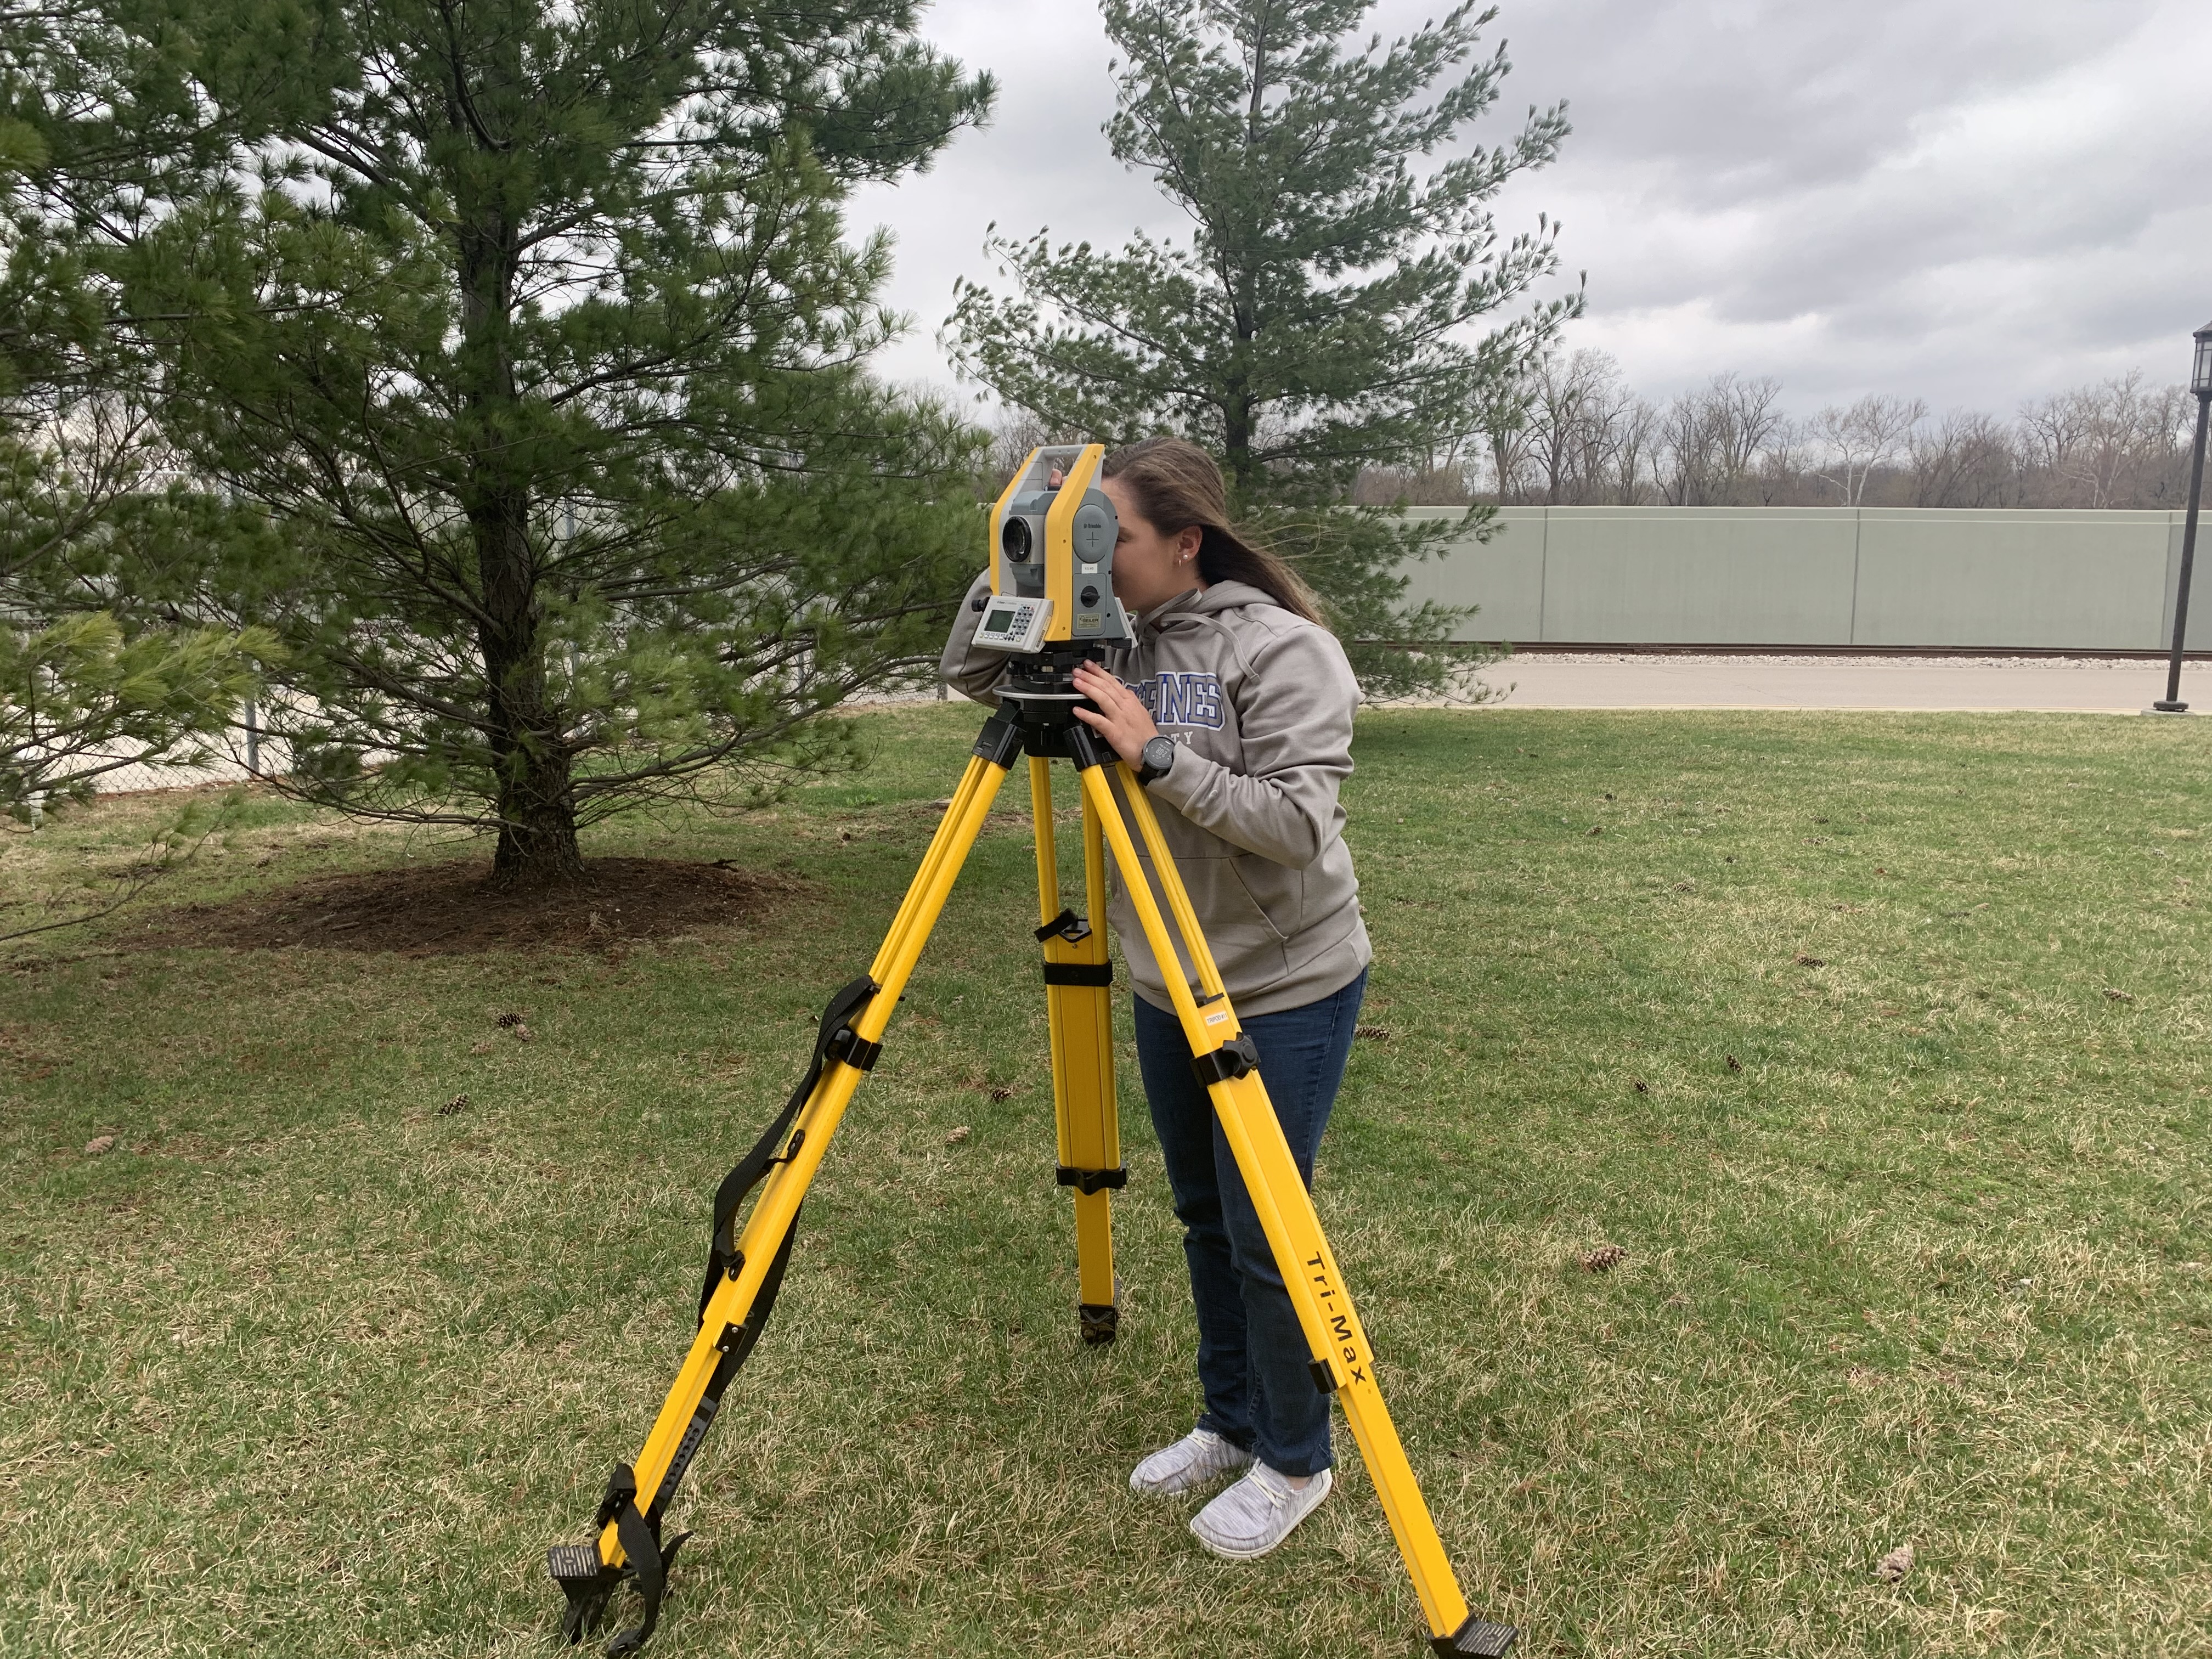 Karissa Gayer operates surveying equipment while she stands near trees